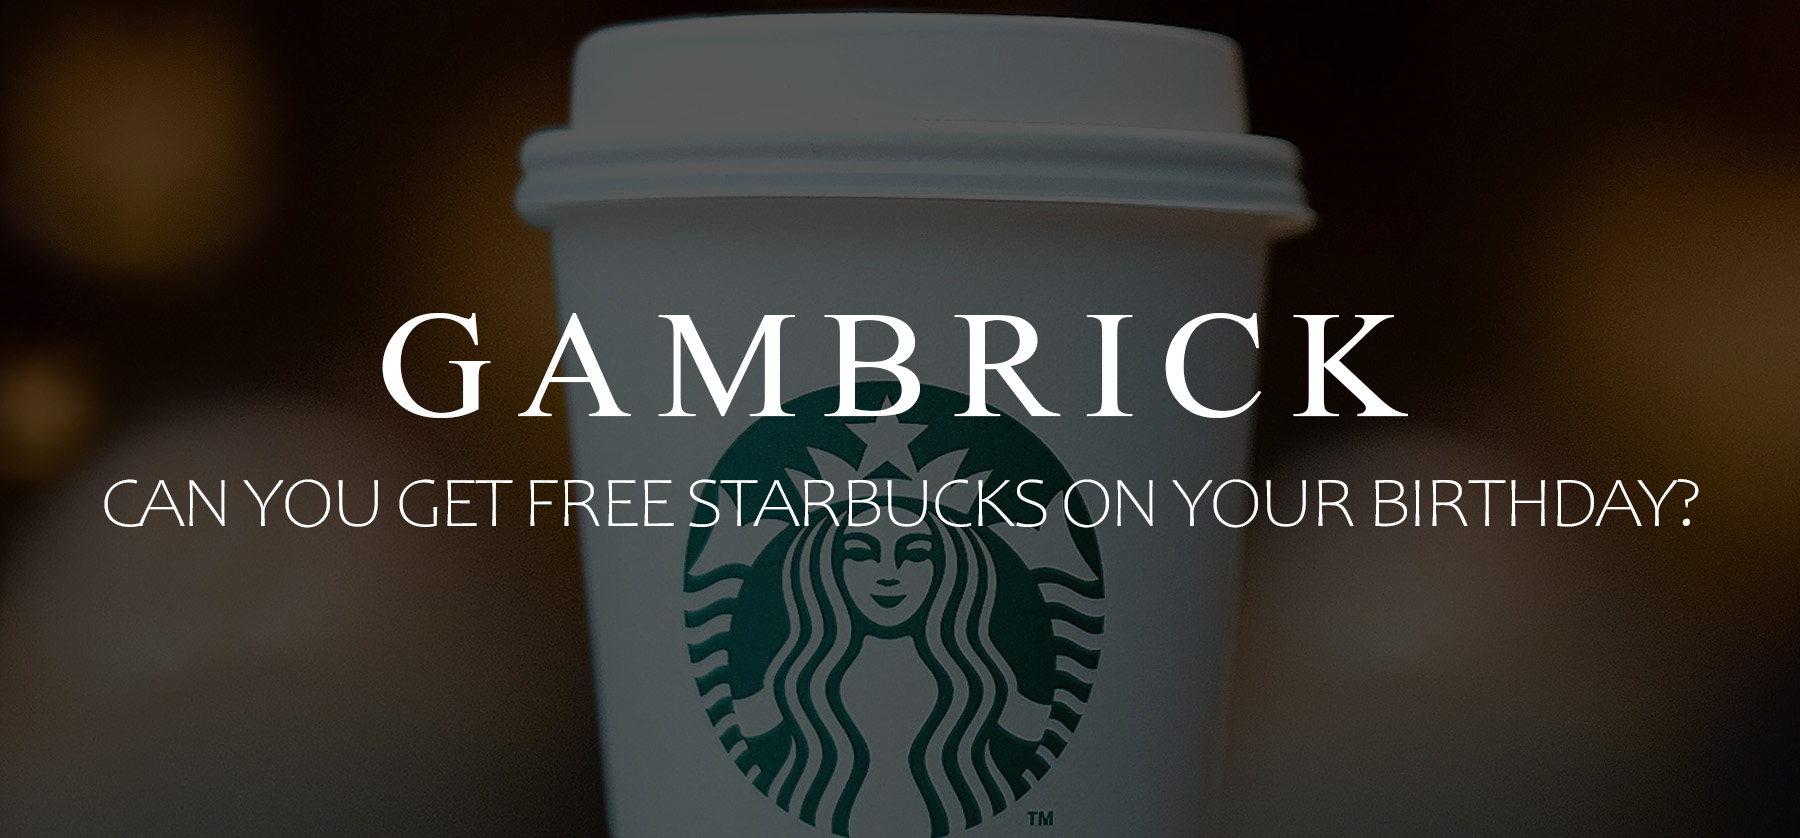 can you get free Starbucks on your birthday banner 1.0